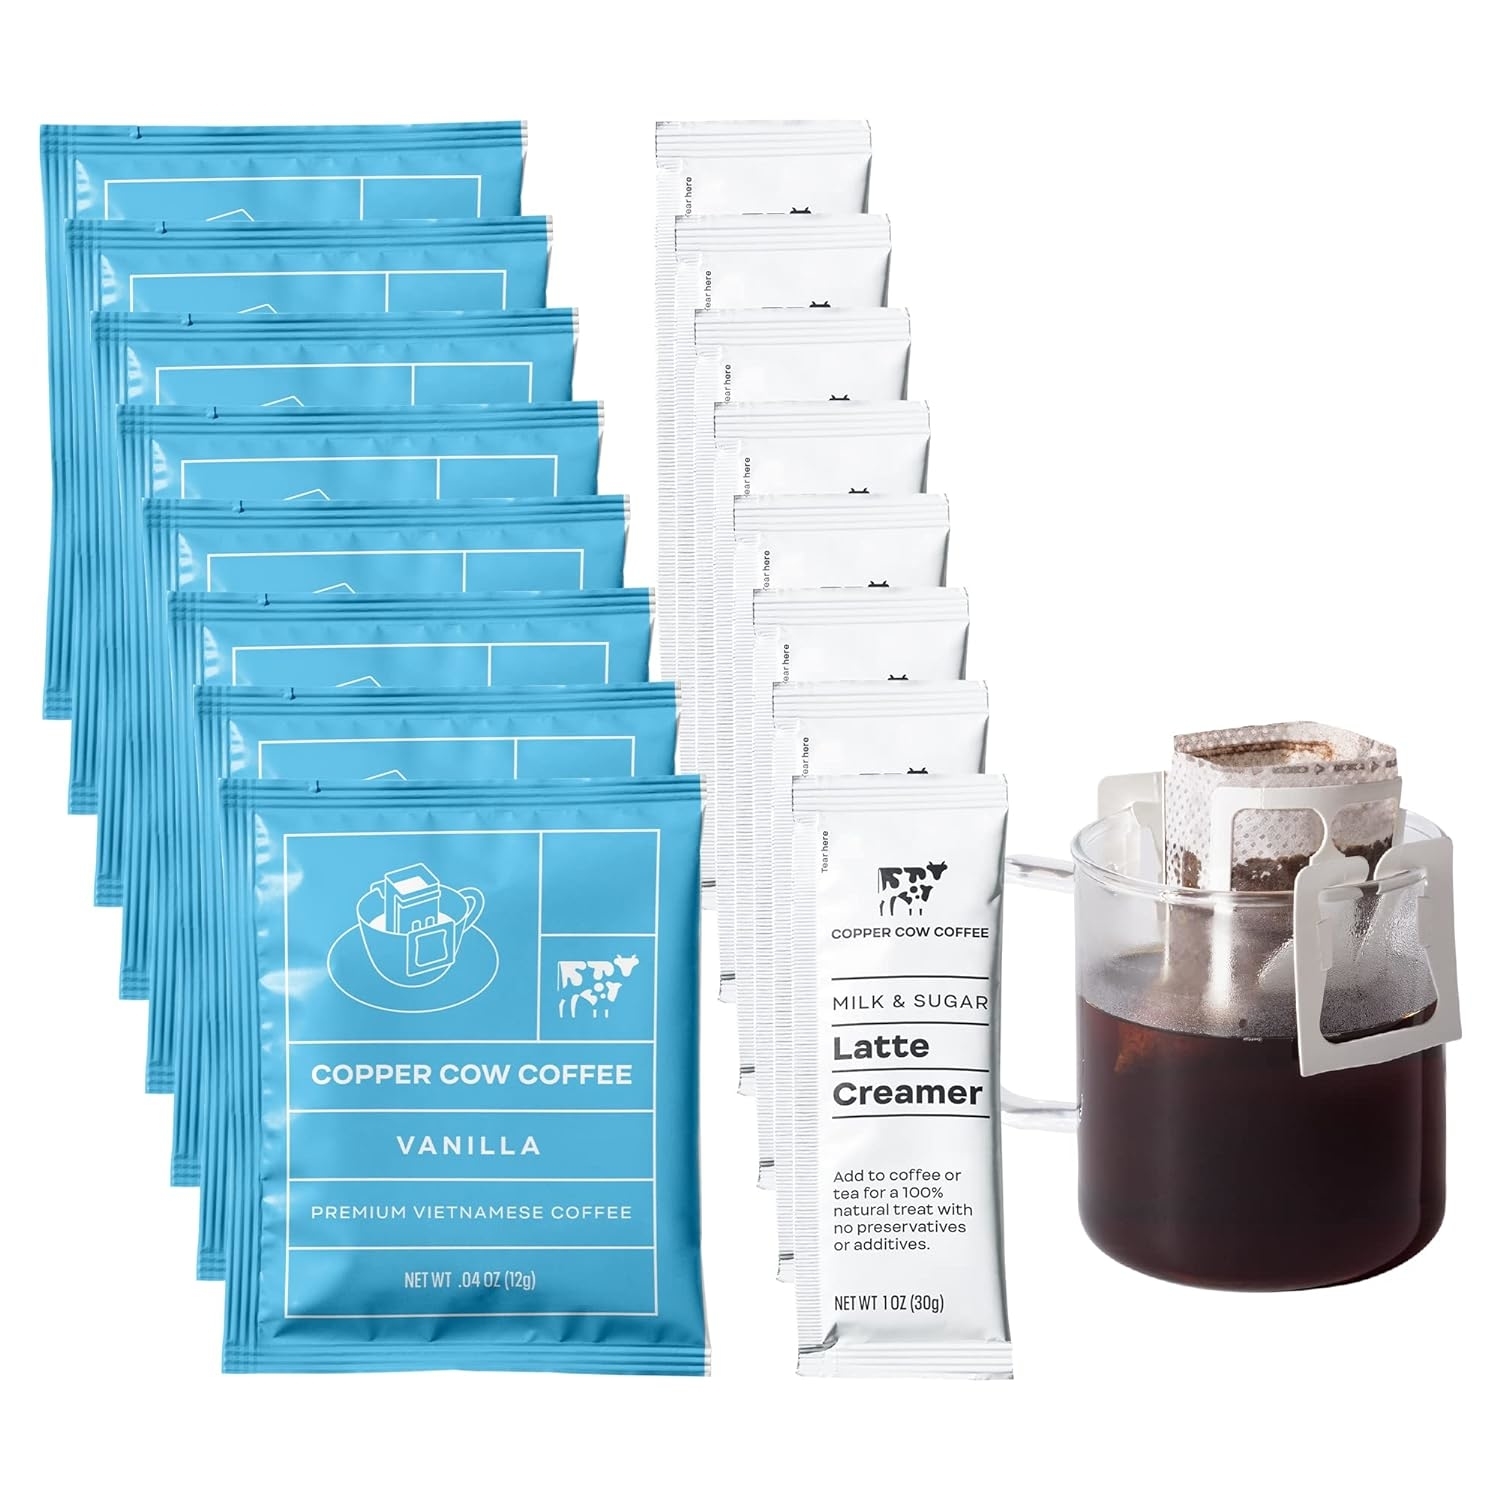 Packets of coffee and creamer on white background